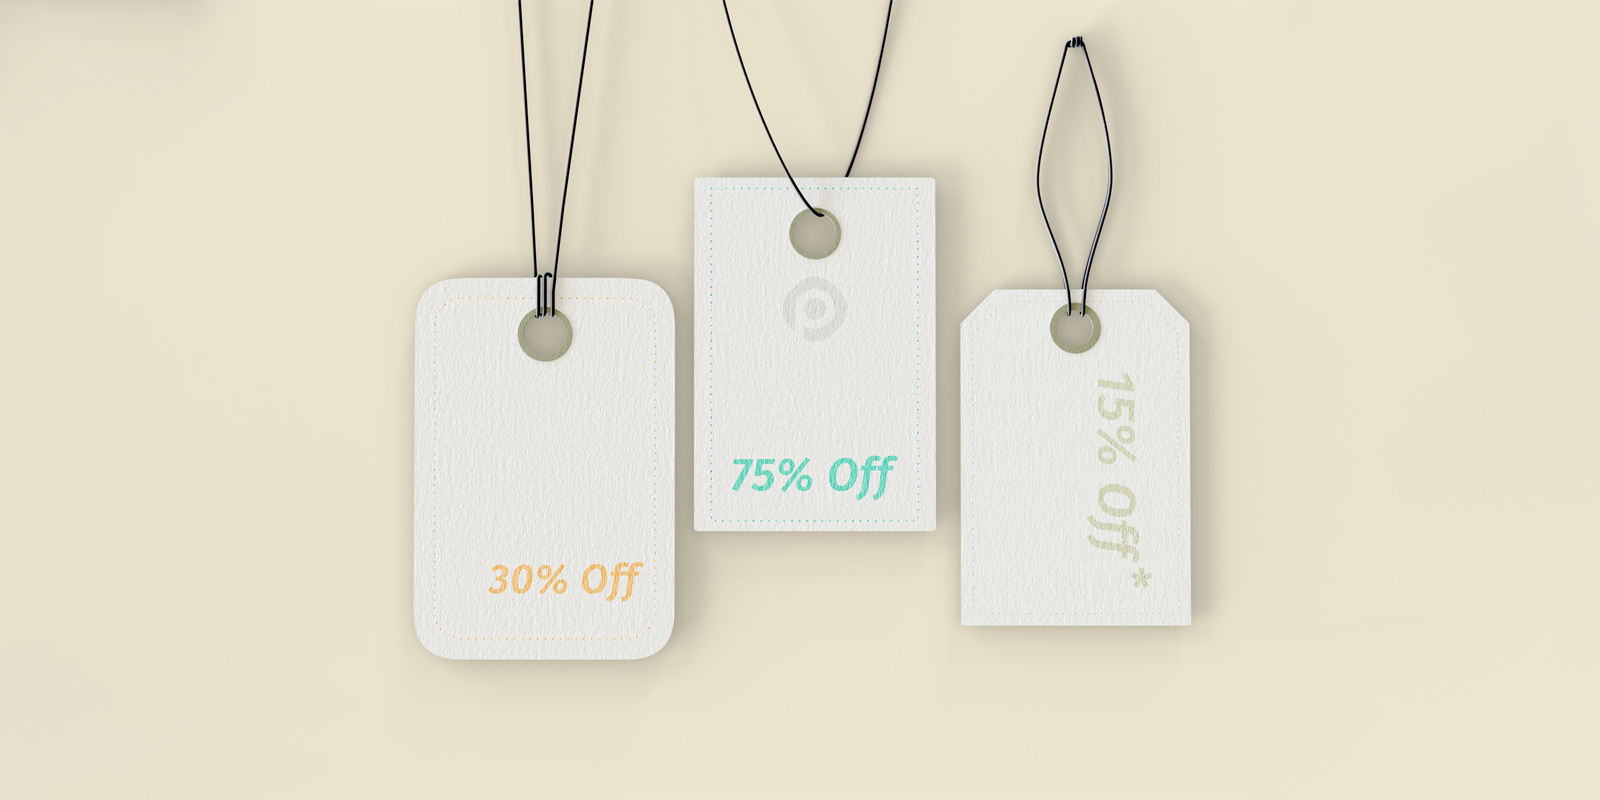 Discount labels in Melbourne - Print with Pagerr